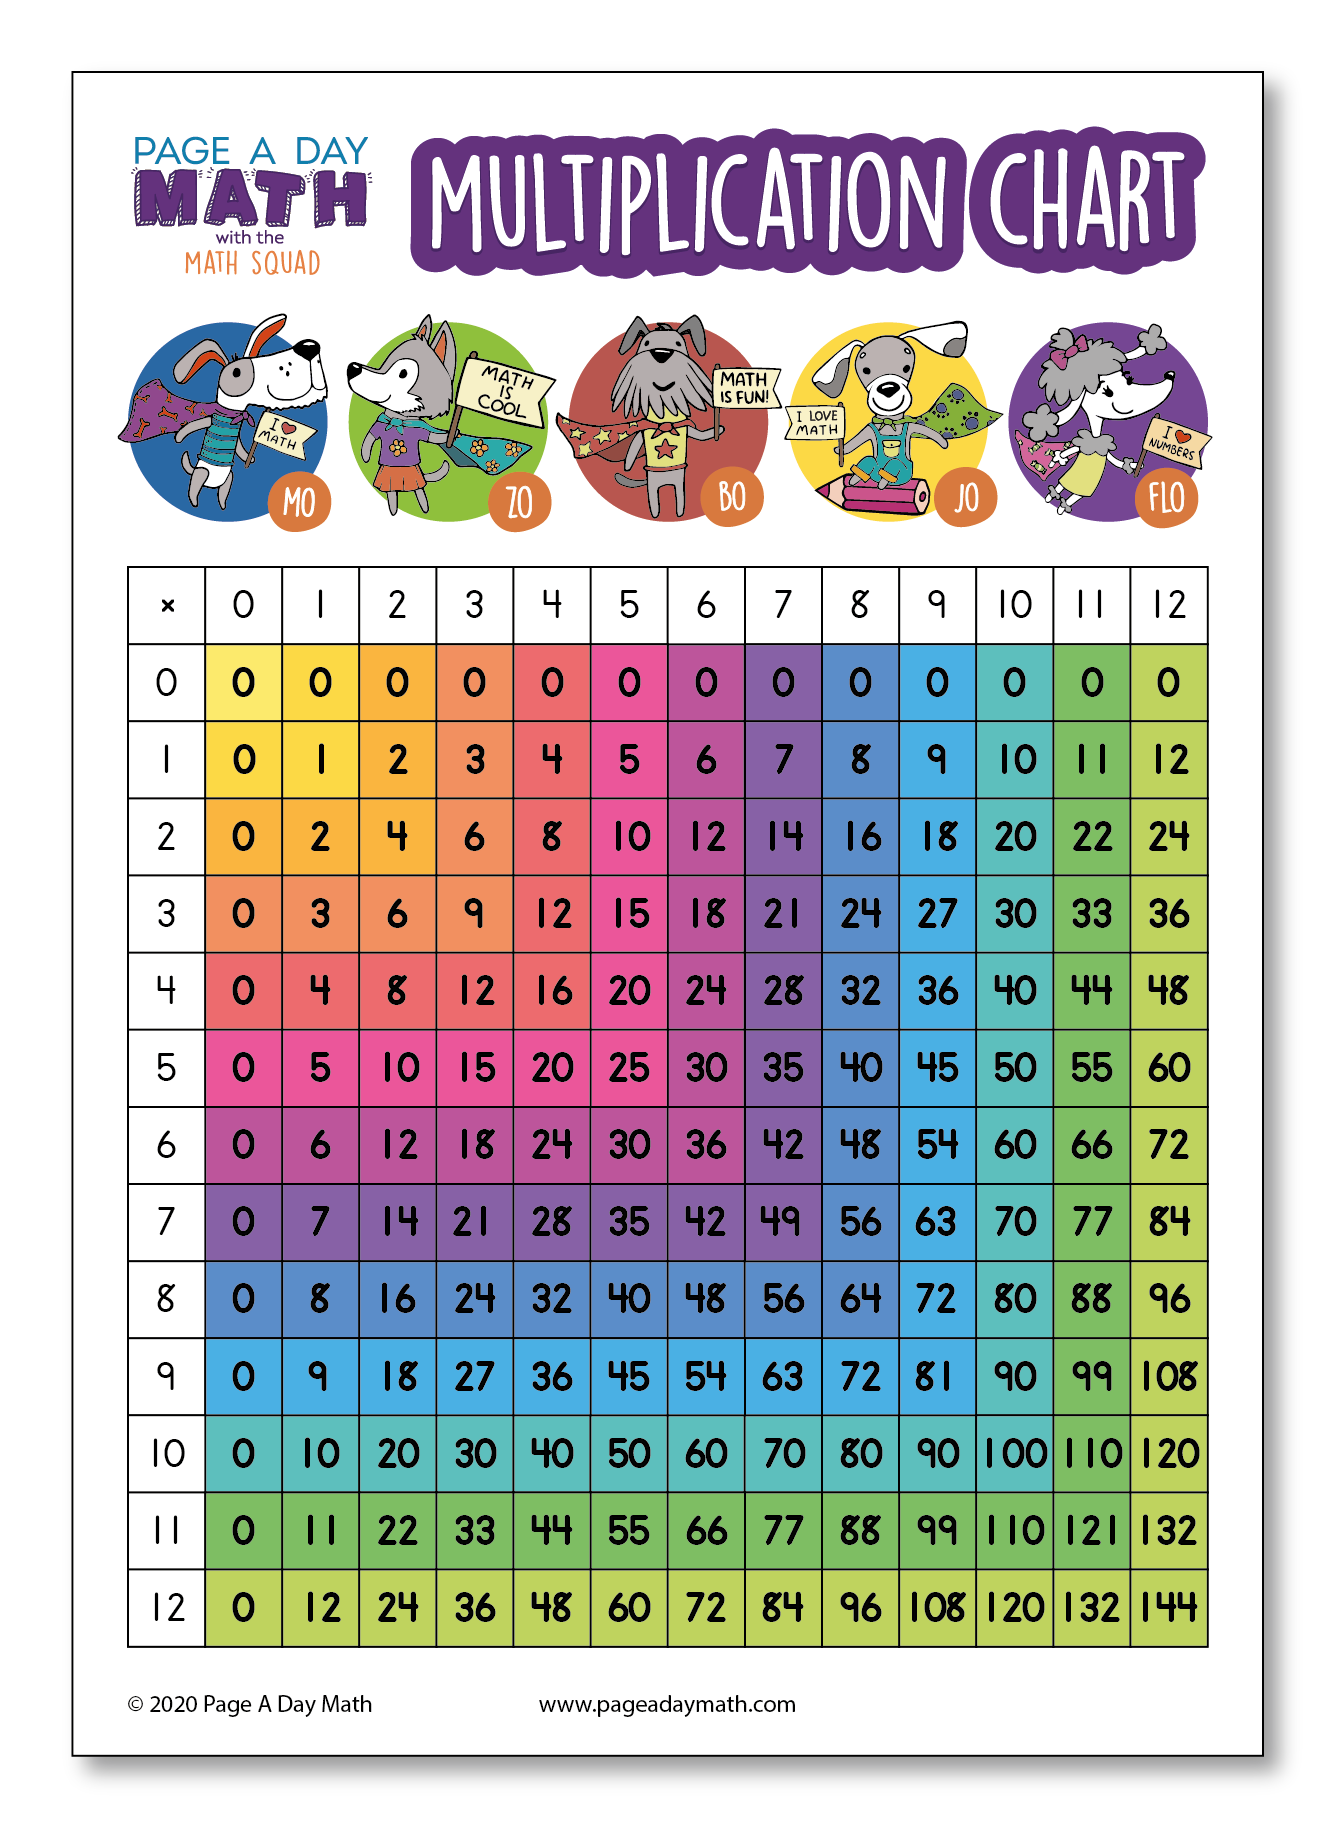 multiplication-table-multiplication-chart-multiplication-activity-page-a-day-math